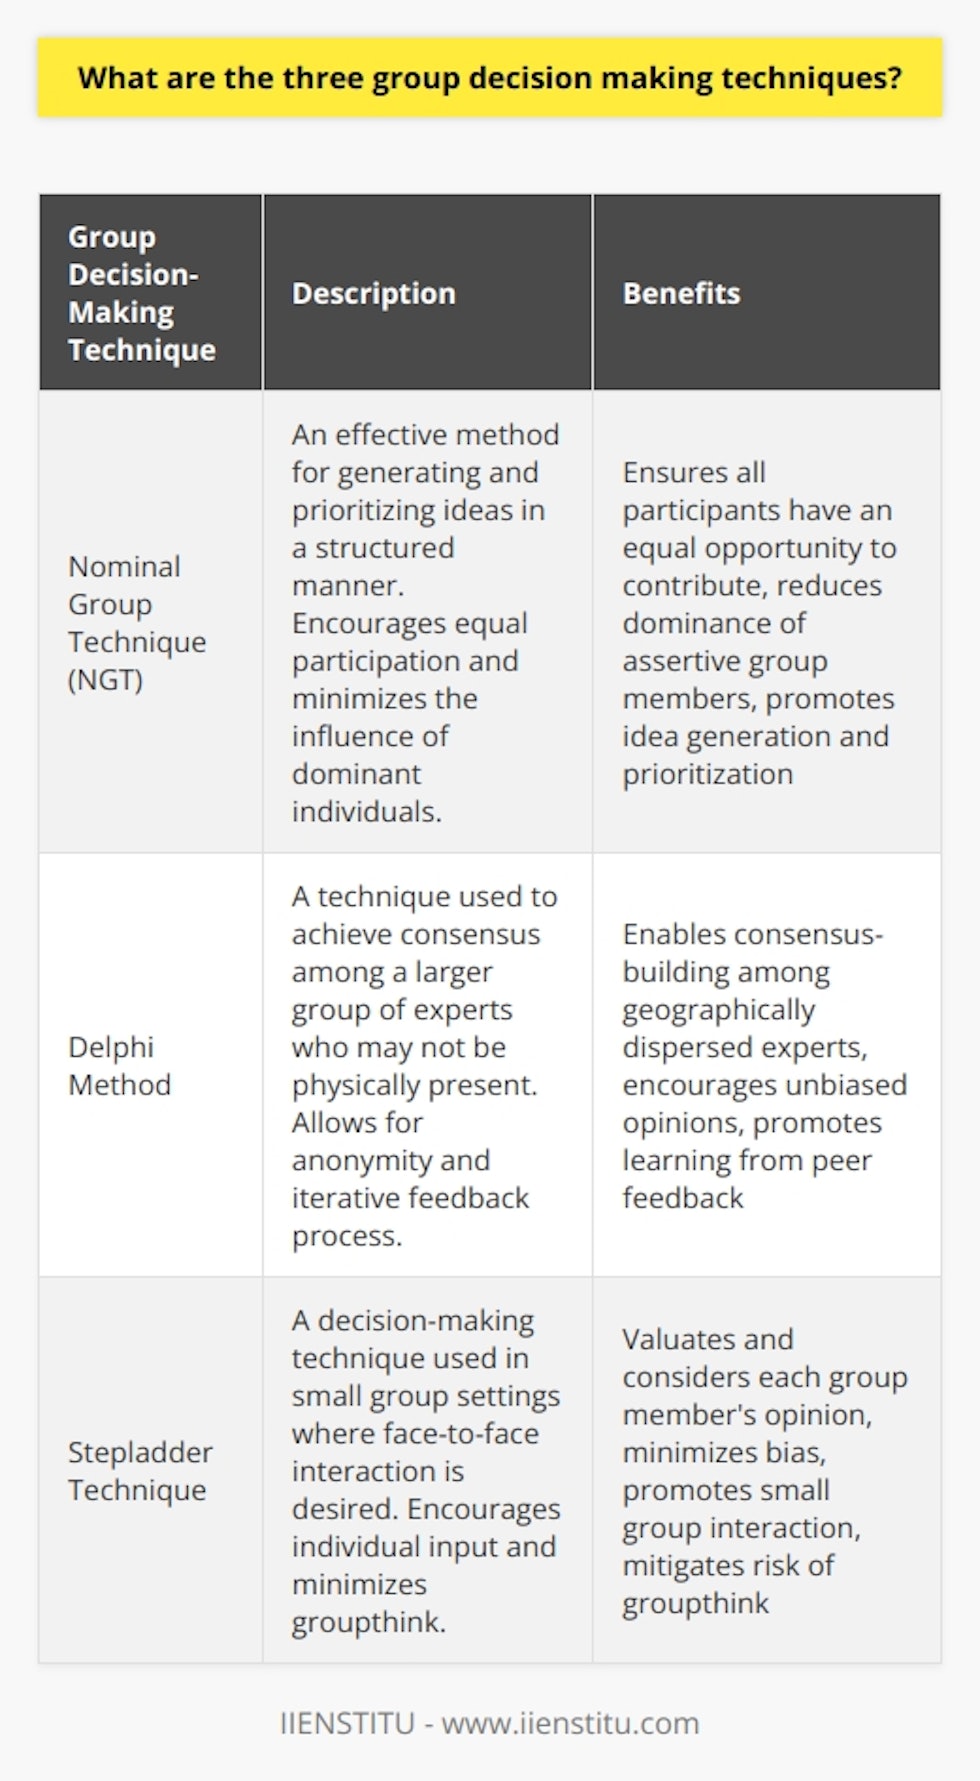 Group decision-making techniques are strategies used to facilitate the process of making decisions in a group setting. These techniques aim to ensure that all members of the group are given an equal opportunity to participate and that the final decision reflects the collective opinion of the group. While there are several group decision-making techniques, three commonly used ones are the Nominal Group Technique (NGT), the Delphi Method, and the Stepladder Technique.1. Nominal Group Technique (NGT):The Nominal Group Technique is an effective method for generating and prioritizing ideas in a structured manner. This technique ensures that all participants have an equal opportunity to contribute and reduces the dominance of more assertive group members. The process begins by having each participant independently write down their ideas related to the decision at hand. Afterward, the ideas are shared and discussed as a group. Finally, a voting process is conducted to prioritize the ideas, ensuring that the final decision is representative of the group's collective opinion. The NGT encourages equal participation and minimizes the influence of dominant individuals.2. Delphi Method:The Delphi Method is a technique used to achieve consensus among a larger group of experts who may not be physically present in the same location. This method is particularly beneficial when experts are geographically dispersed or when their identities need to remain anonymous. The Delphi Method involves an iterative process where anonymous questionnaires are sent to experts. These experts provide their responses, which are then collected, analyzed, and shared with the group. Experts have the opportunity to revise their views based on the opinions of their peers, and this process continues until a consensus is reached. The Delphi Method allows participants to provide unbiased opinions and learn from each other through an iterative feedback process.3. Stepladder Technique:The Stepladder Technique is a decision-making technique commonly used in small group settings where face-to-face interaction is desired. This technique encourages individual input and aims to minimize the risk of groupthink. The process begins by having two group members discuss the decision at hand and agree on their preferred option. Then, a third member joins the discussion, presents their opinion, and the group reaches a new consensus. This pattern continues as additional members join the discussion one by one until all members have participated and evaluated their options. The Stepladder Technique ensures that each member's opinion is valued and considered before being influenced by the larger group.In summary, the Nominal Group Technique, Delphi Method, and Stepladder Technique are three valuable group decision-making techniques. The NGT promotes equal participation and idea generation, the Delphi Method allows for consensus-building among a larger group, and the Stepladder Technique encourages individual input and minimizes bias. By utilizing these techniques, groups can enhance the decision-making process, incorporate diverse perspectives, and ultimately make more informed and satisfactory decisions.